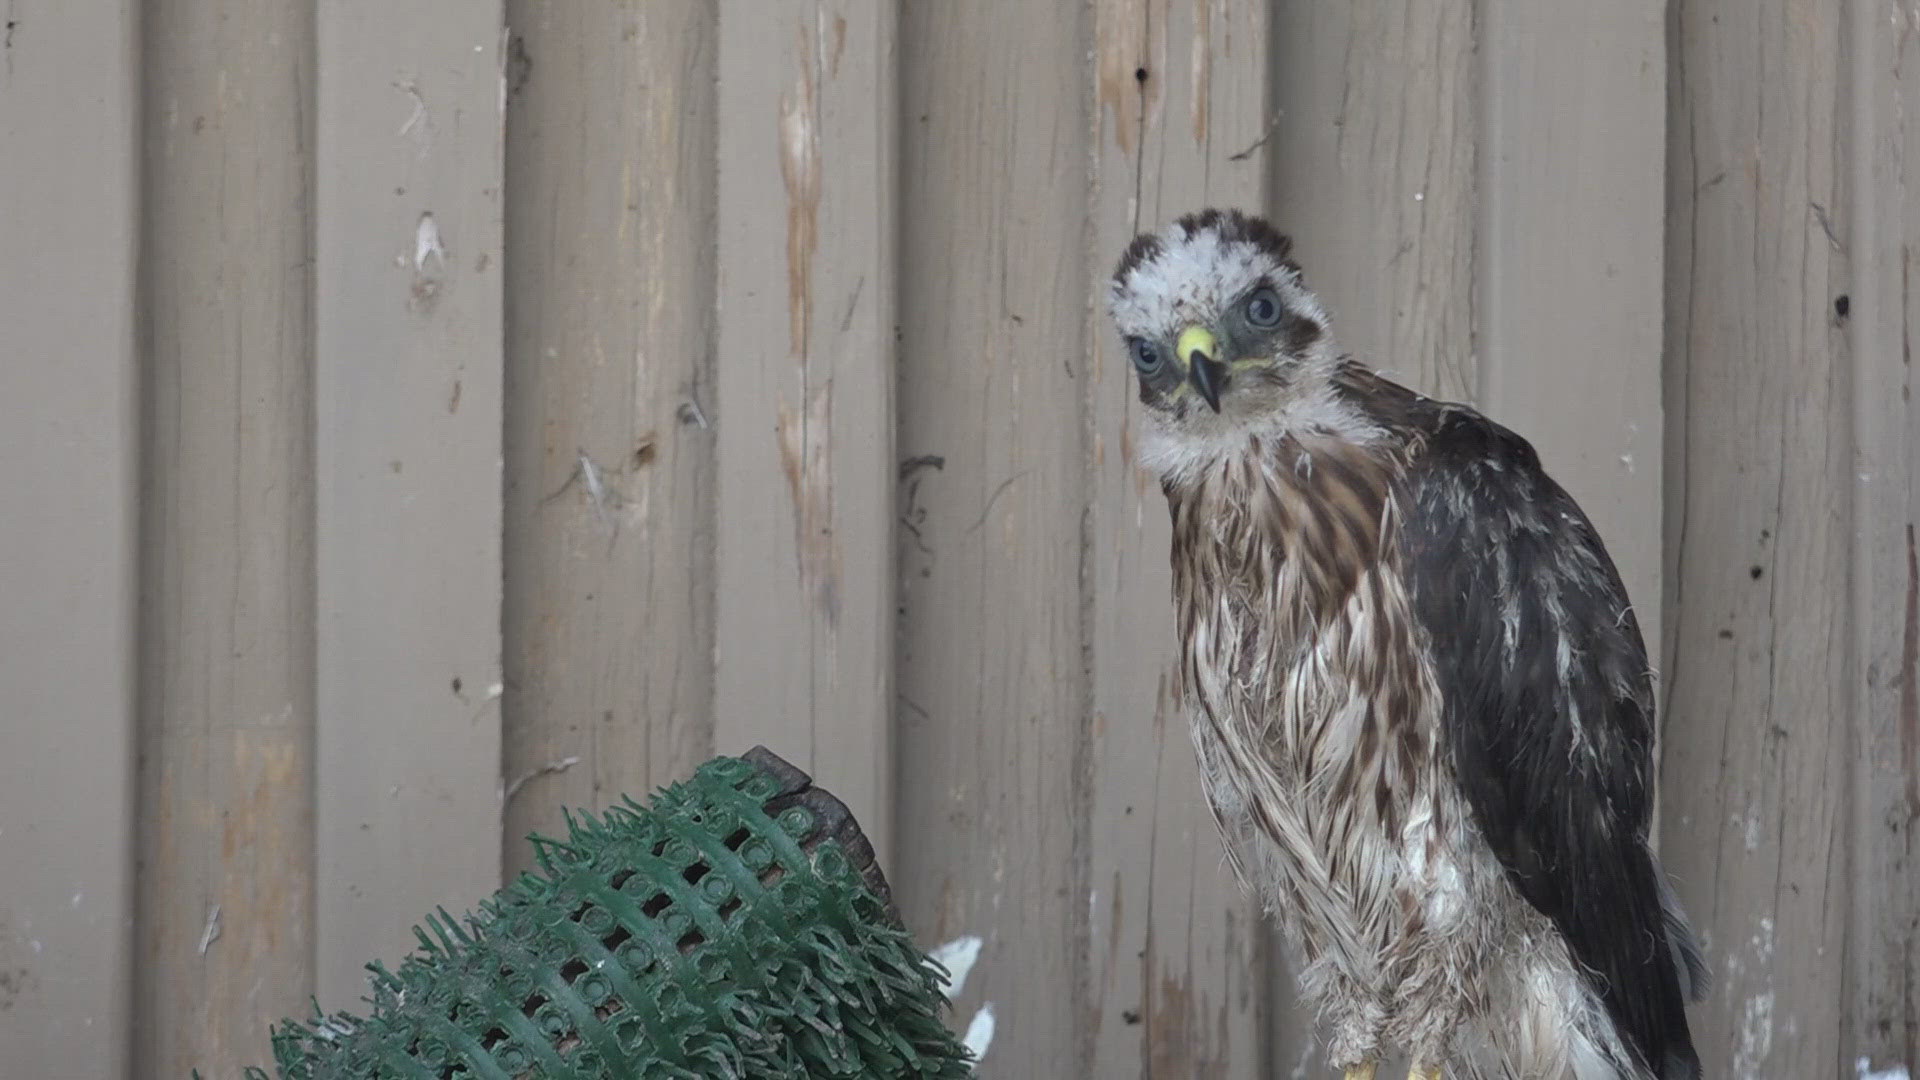 The extreme heat in Arizona is causing problems for wildlife including several Cooper's Hawks. Officials explain what to do if you find a distressed animal.